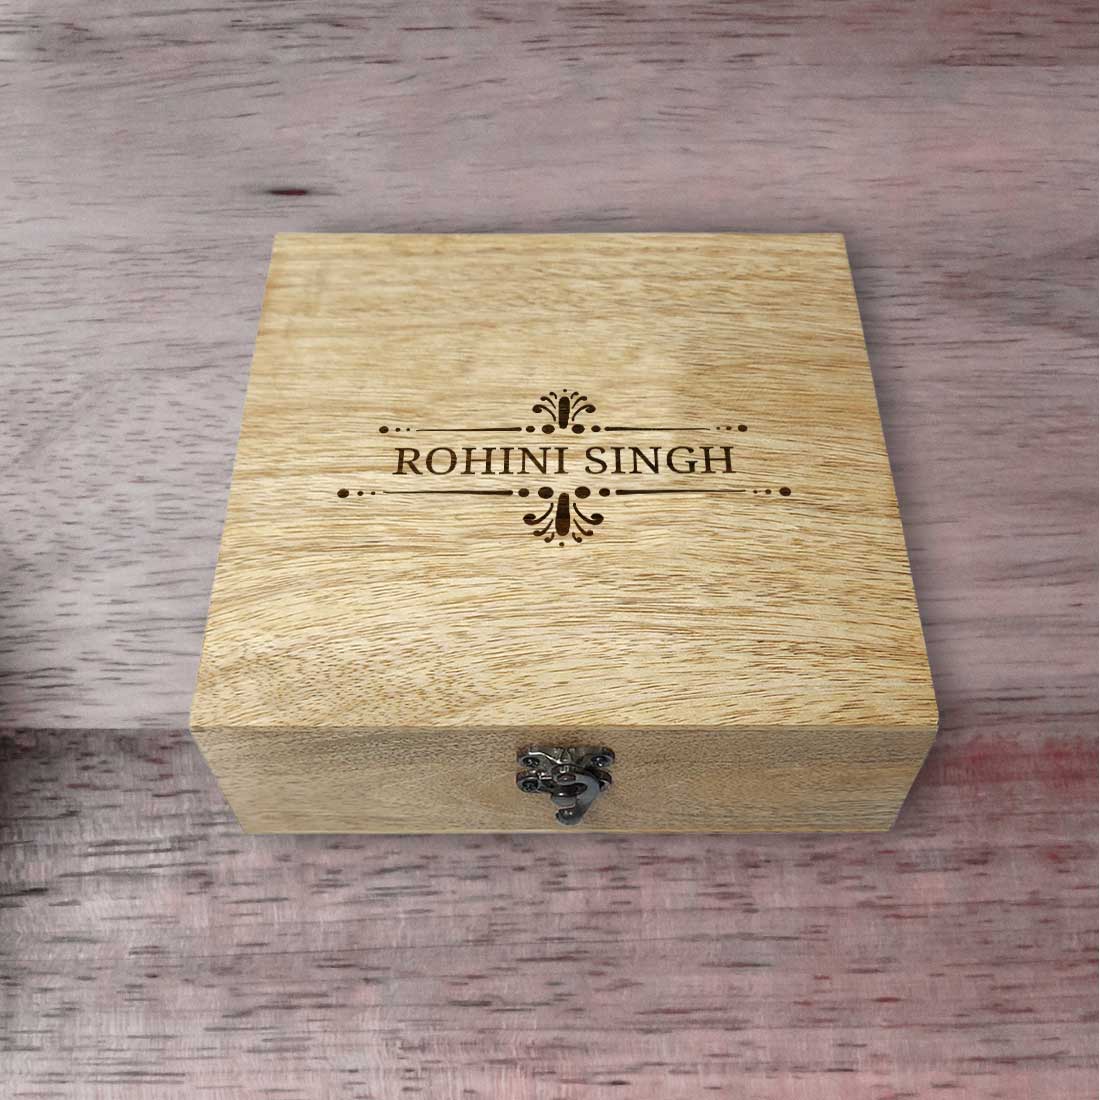 Custom Wooden Boxes with Engraved Name Organisers for Jewellery - Full Name